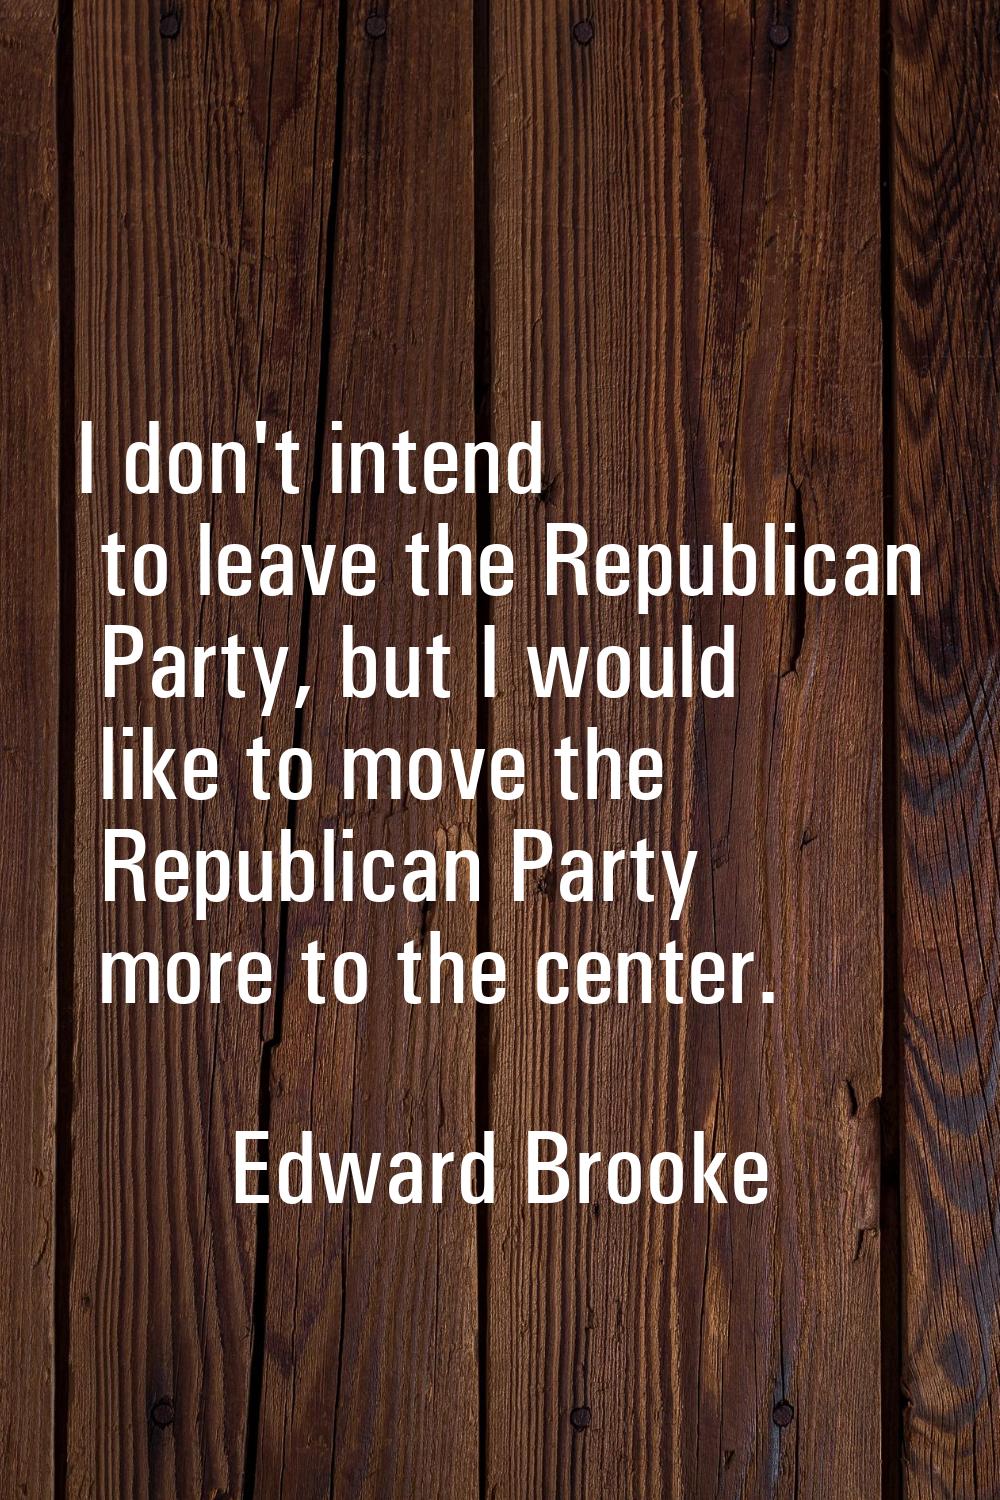 I don't intend to leave the Republican Party, but I would like to move the Republican Party more to